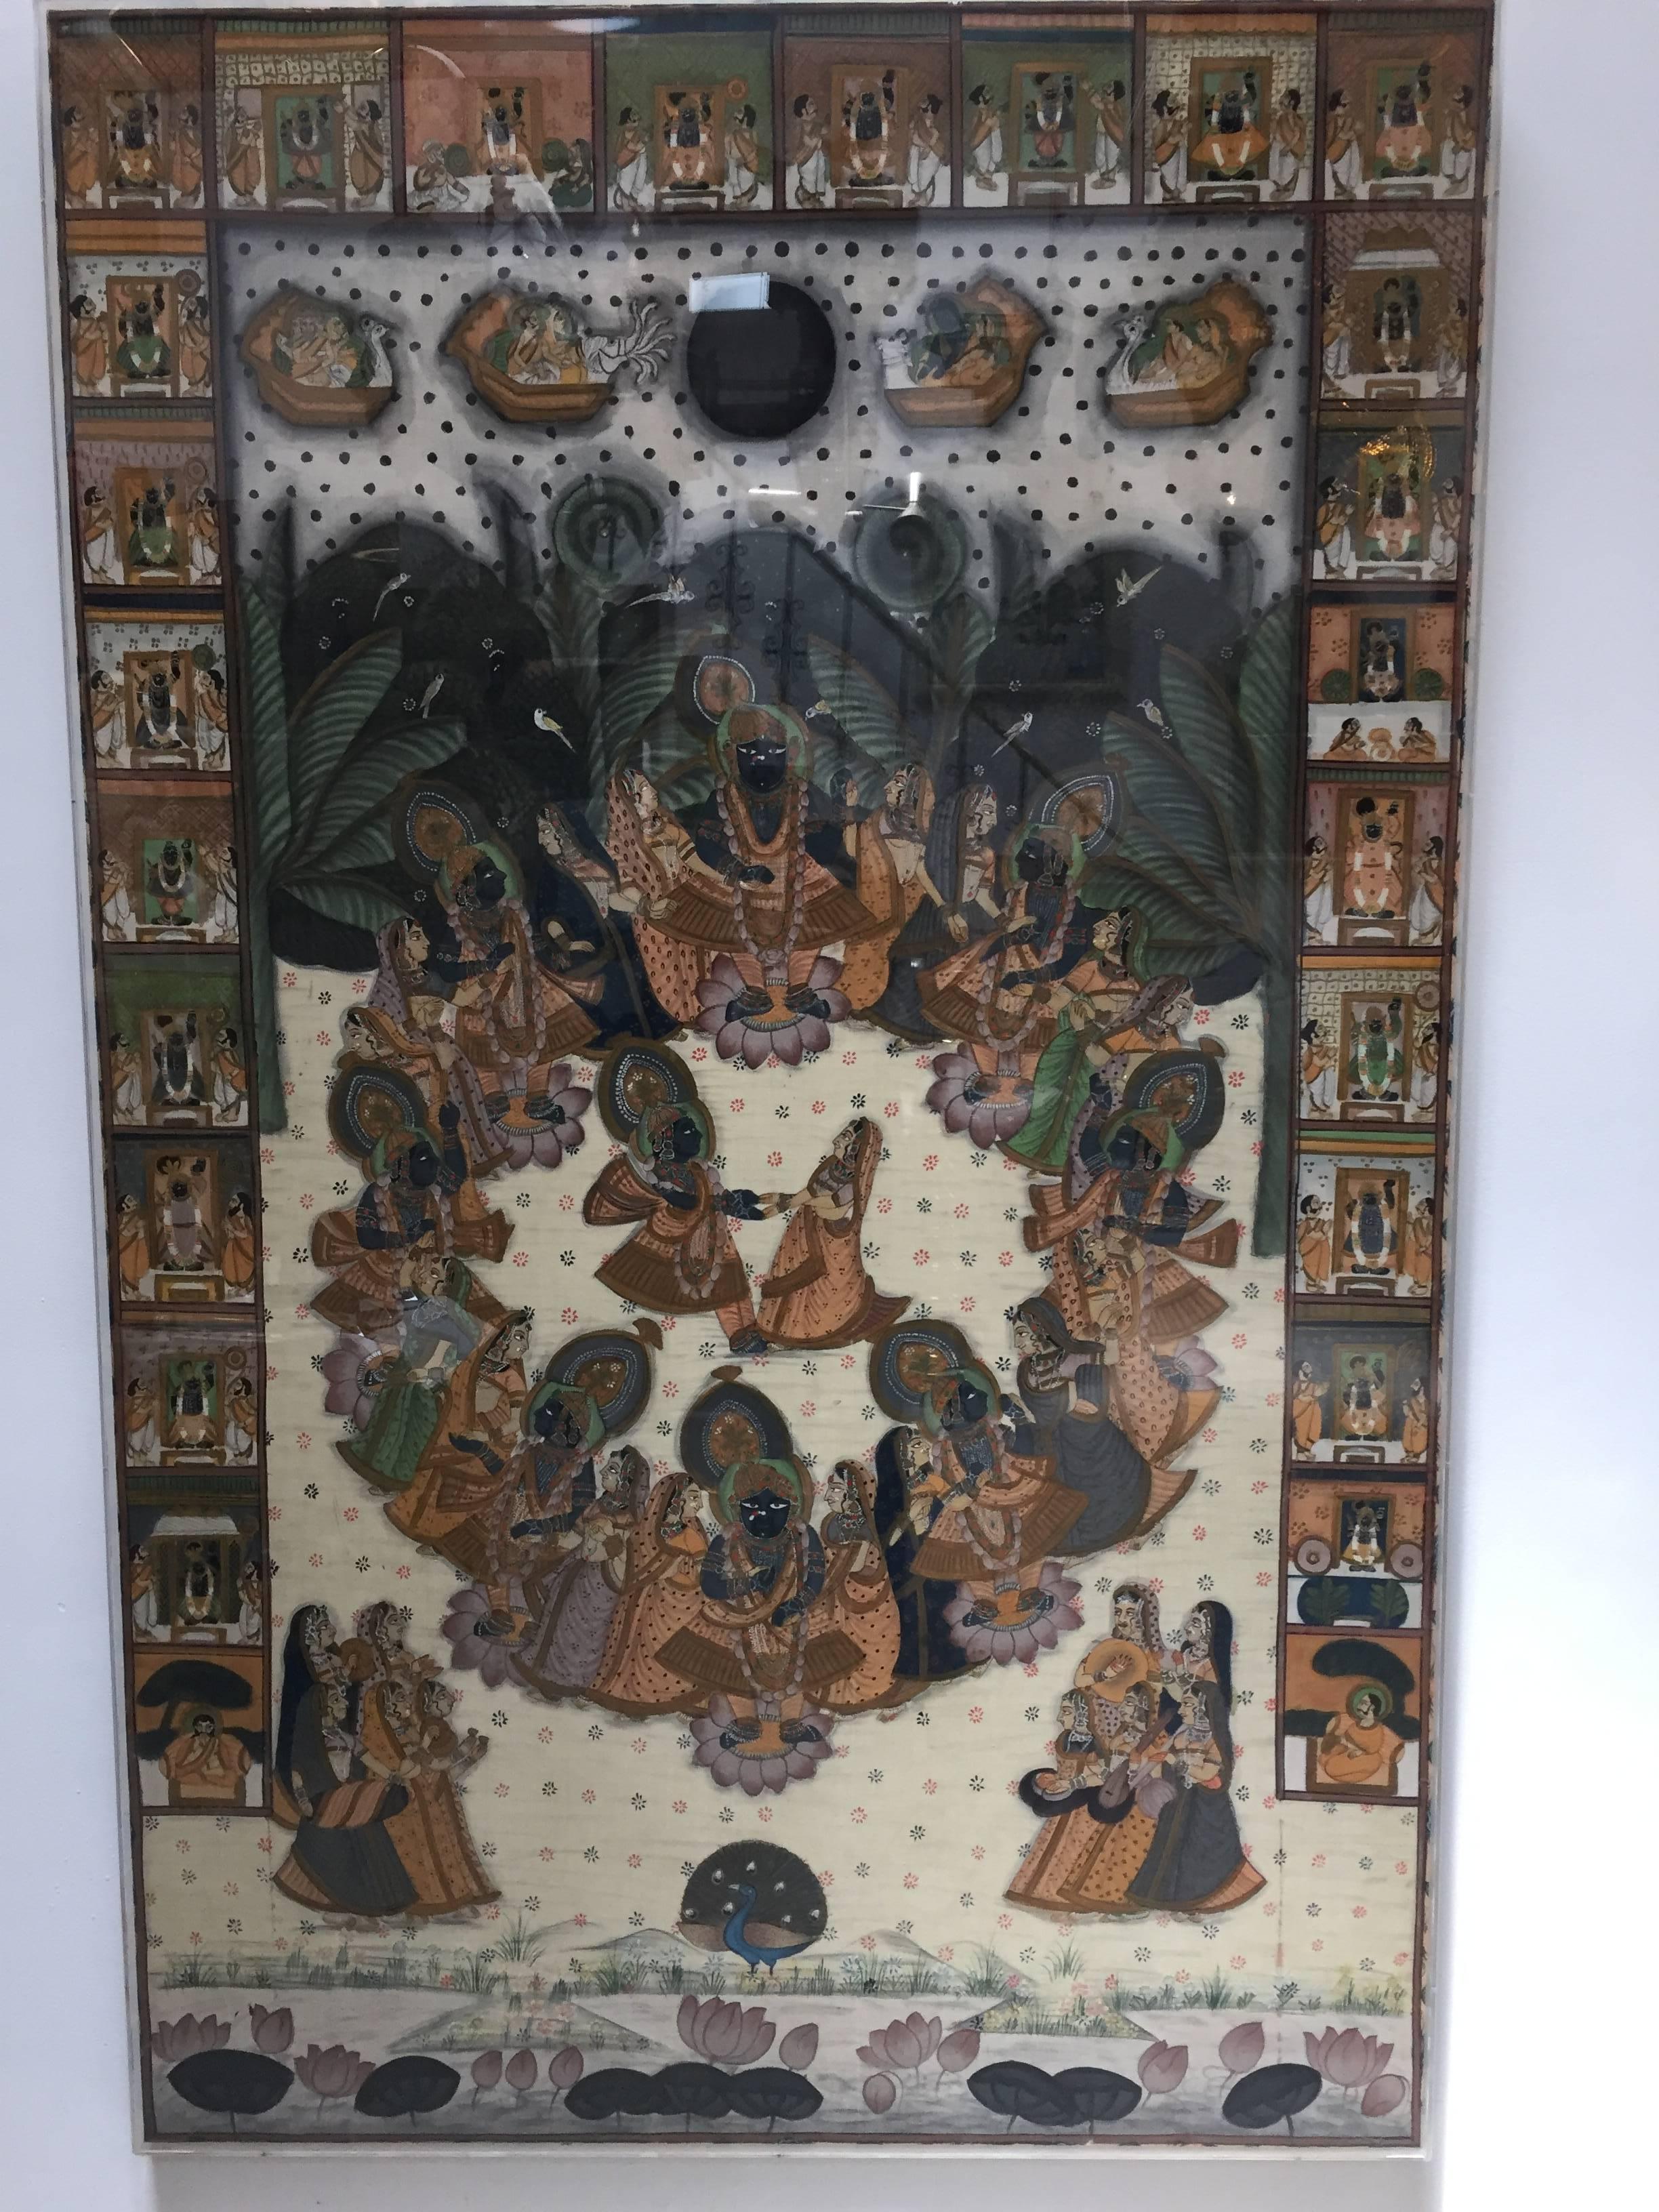 A large Pichhavai painting depicting Krishna, represented in multiple places with female Gopis dancing and offering, great colors, the composition is enclosed in a lush green forest and the colors of the dresses in oranges play off against the